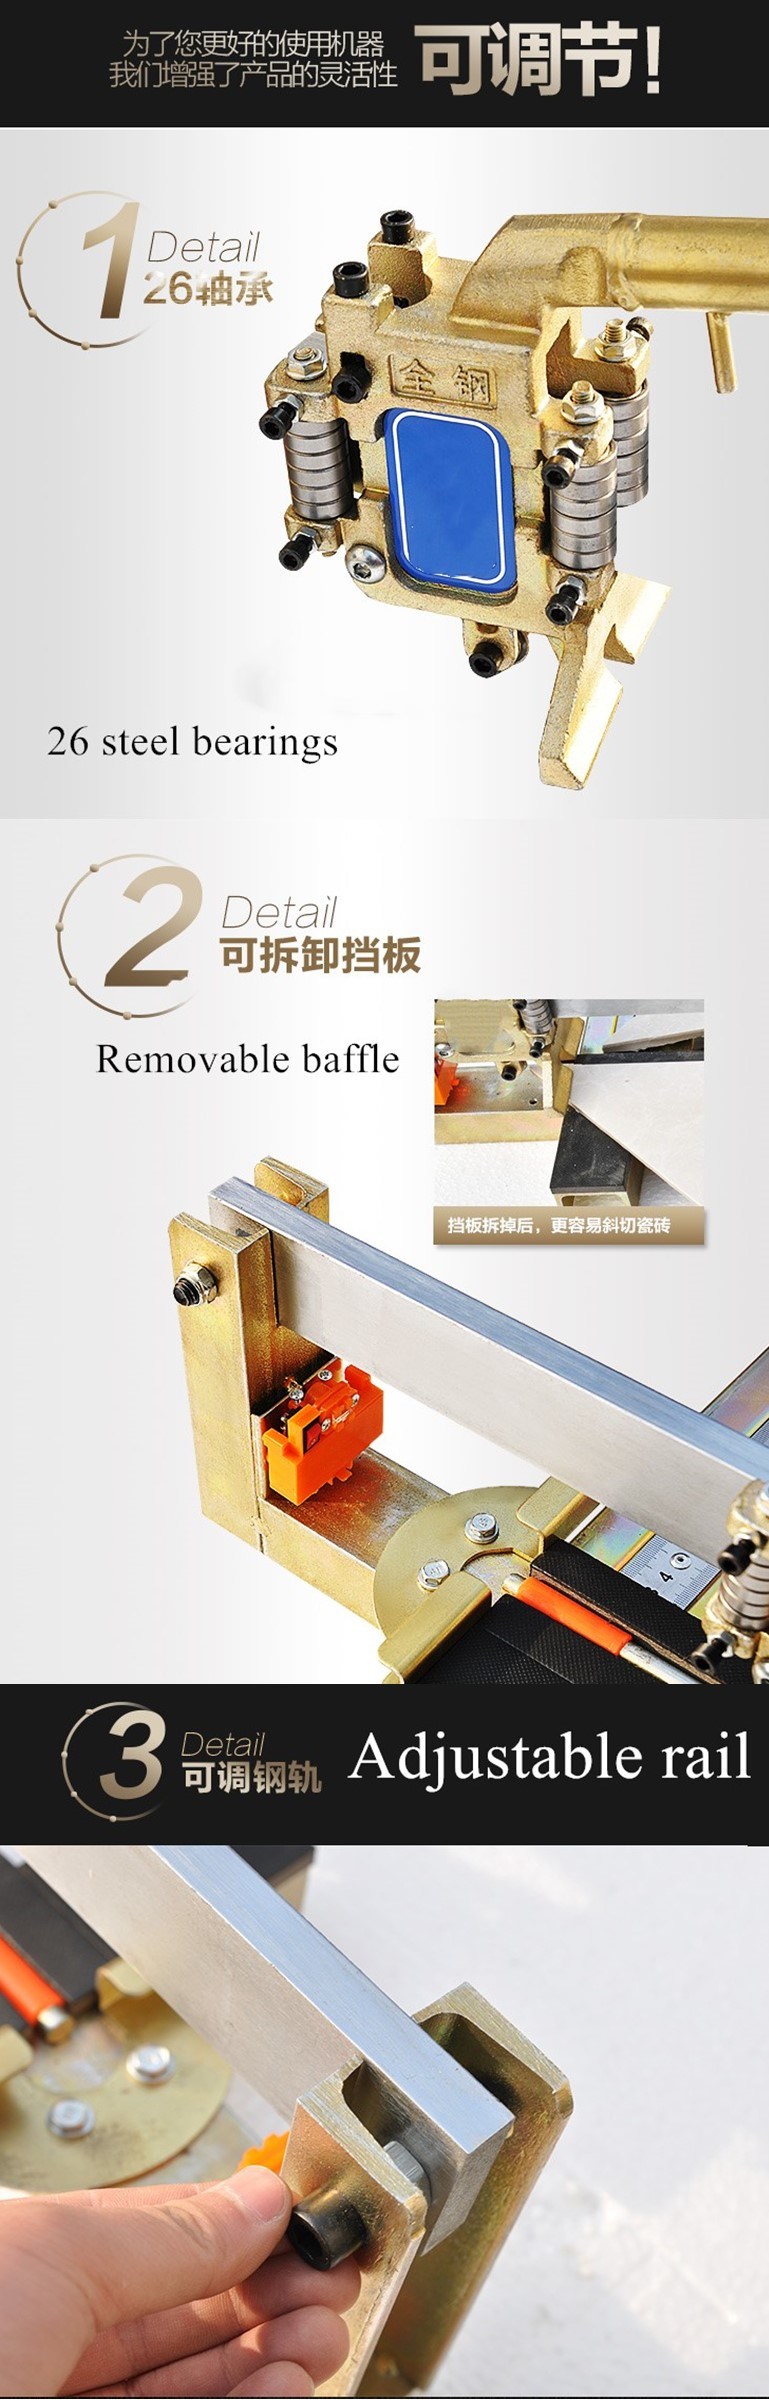 Hand Manual Tile Cutter with Ball Bearing